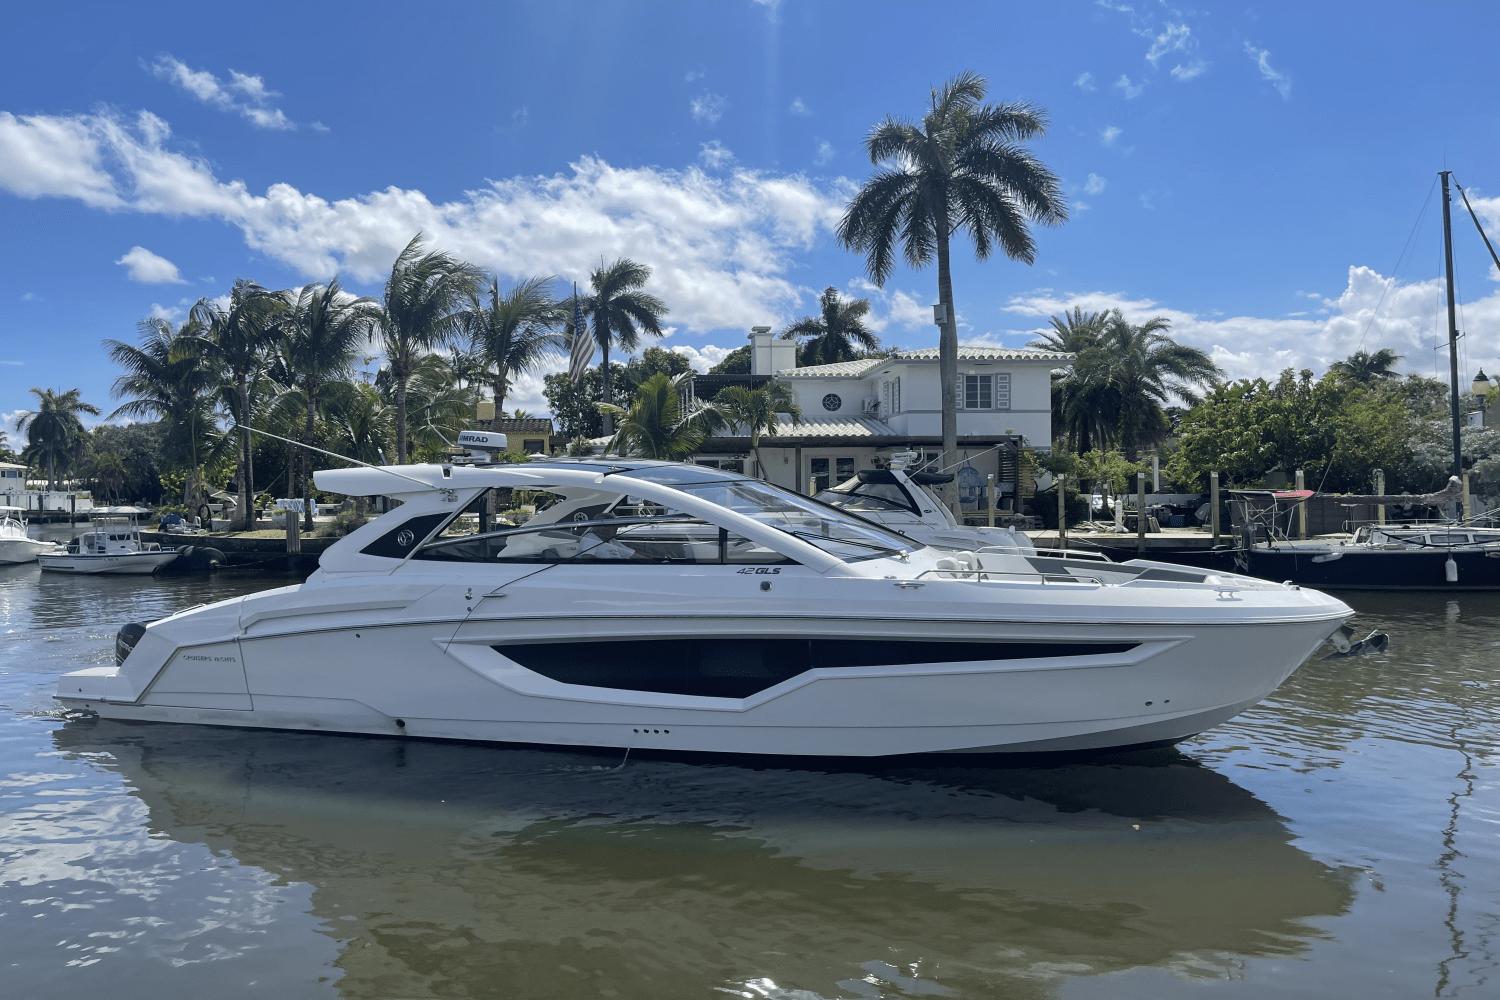 2021 Cruisers Yachts 42 GLS Outboard | 42ft